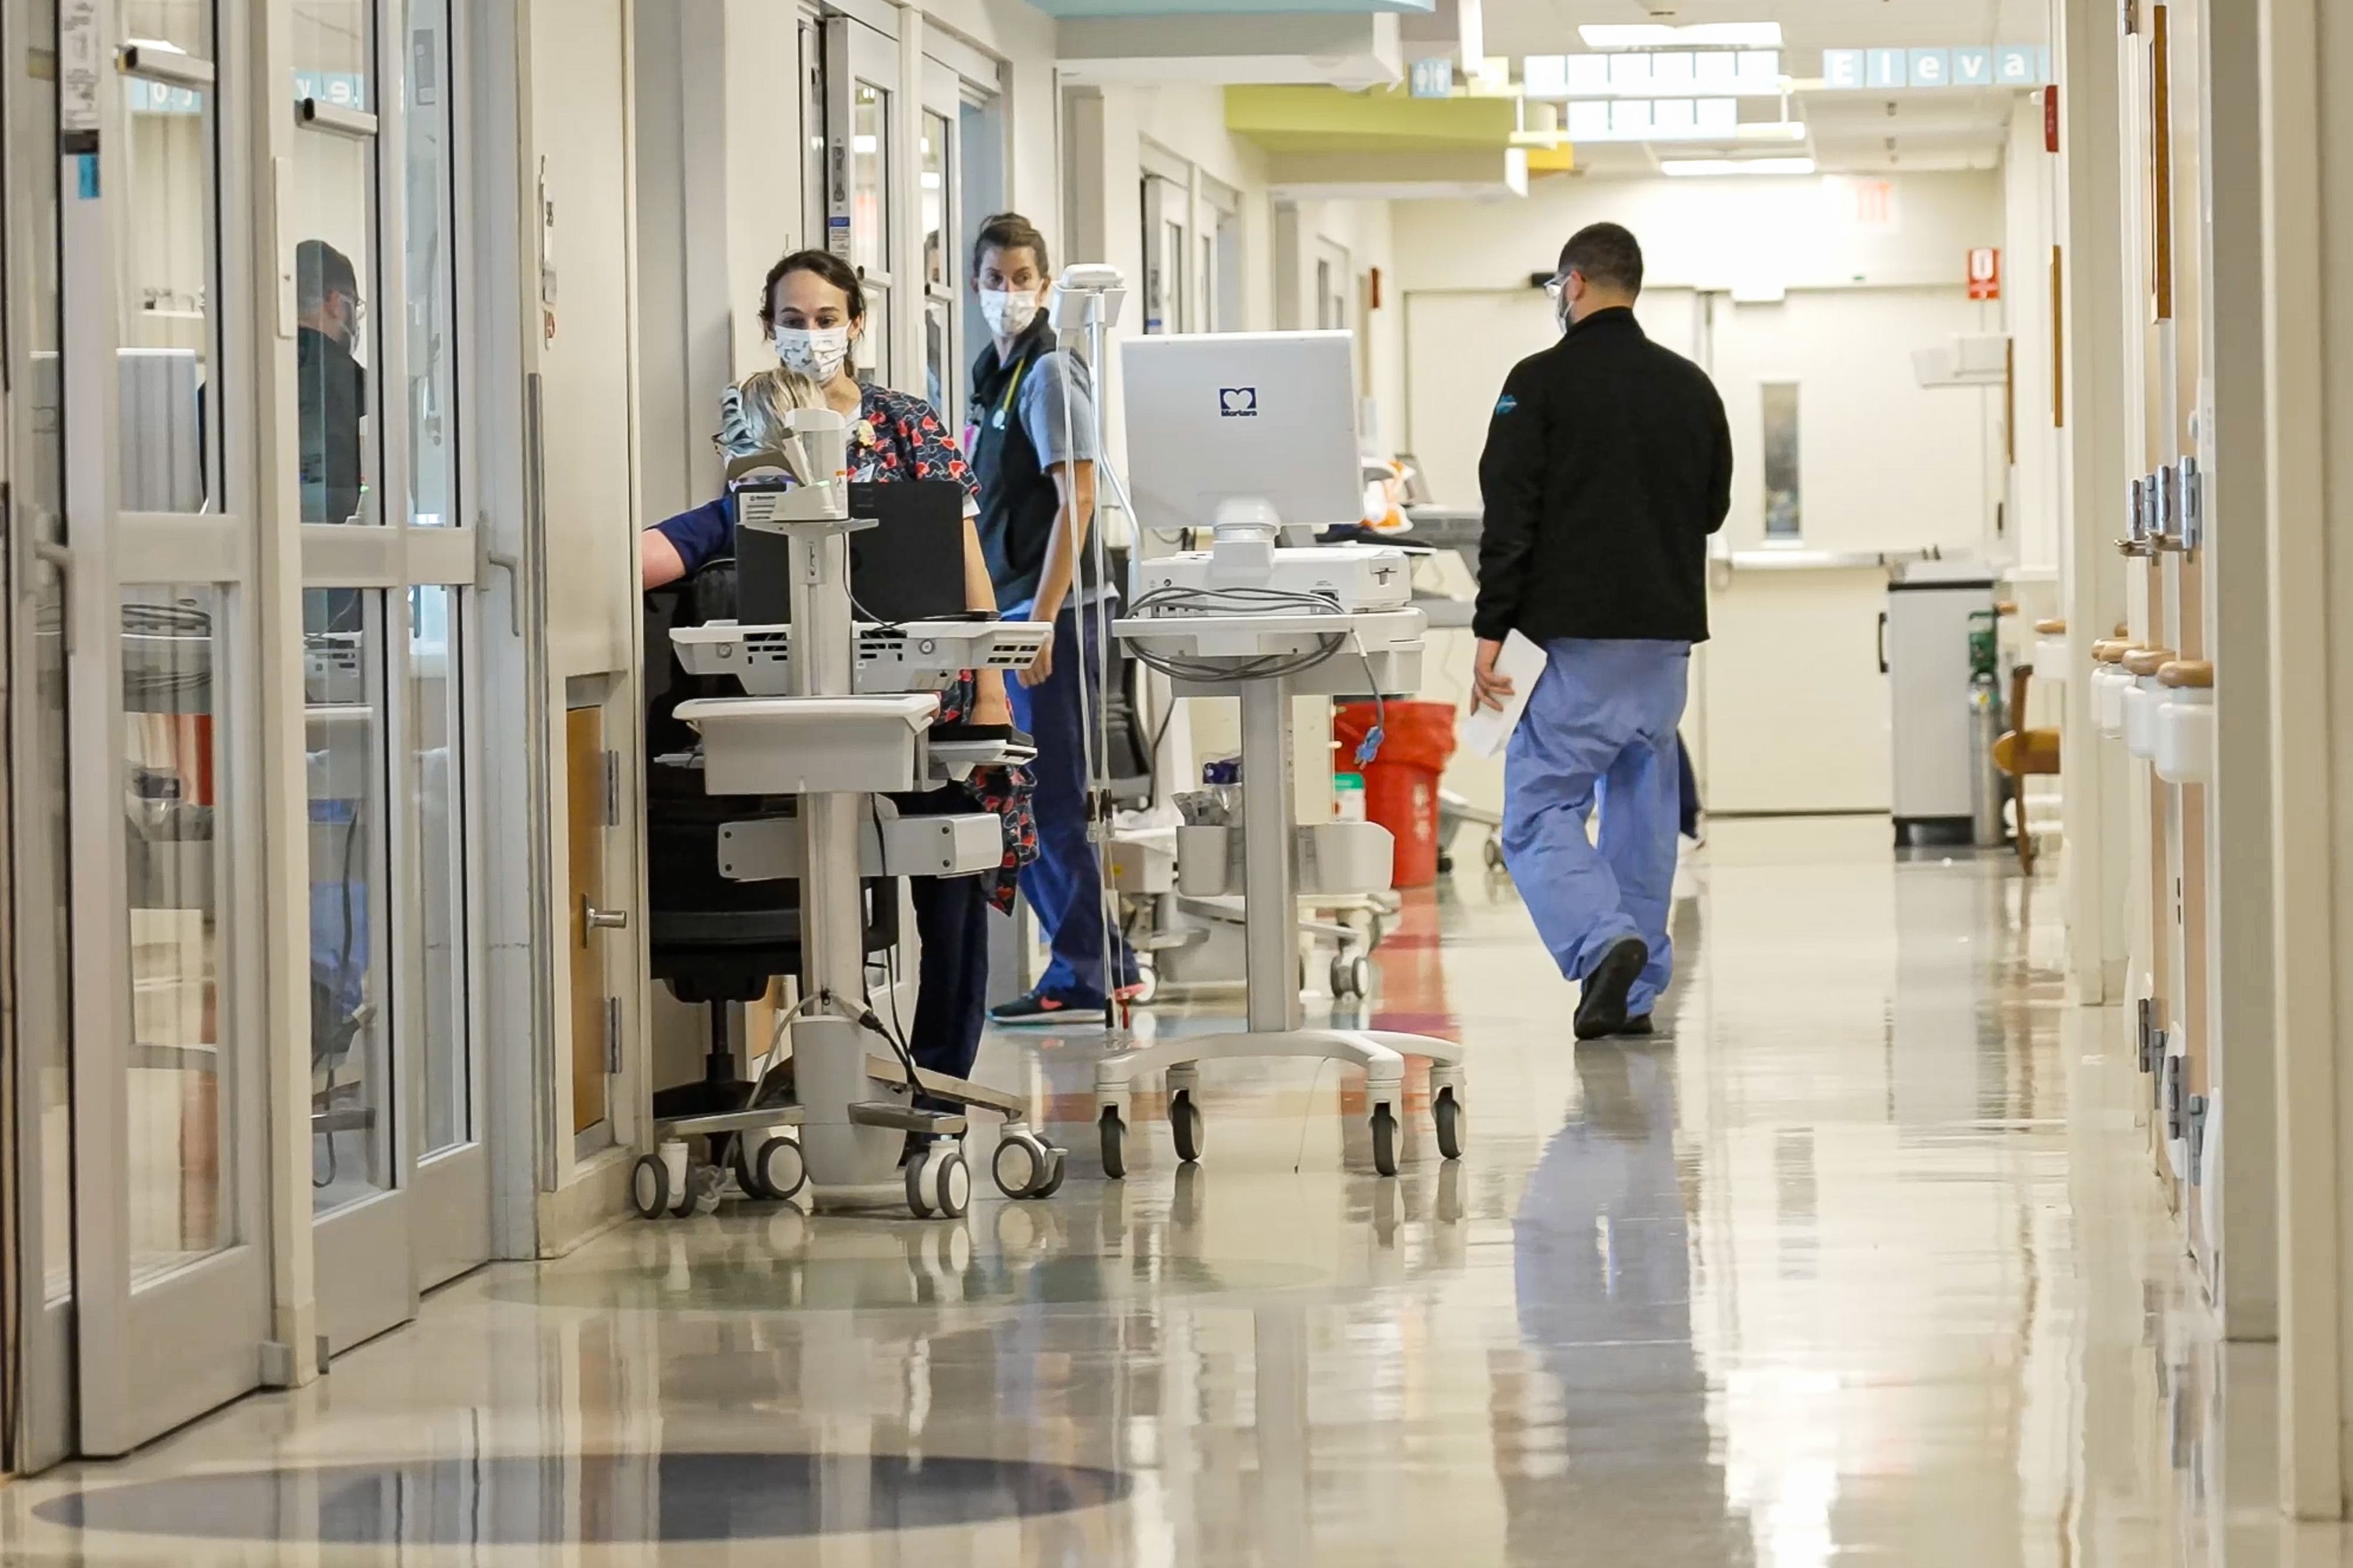 Medical staff work in the hallway of Le Bonheur Children’s Hospital in Tennessee.